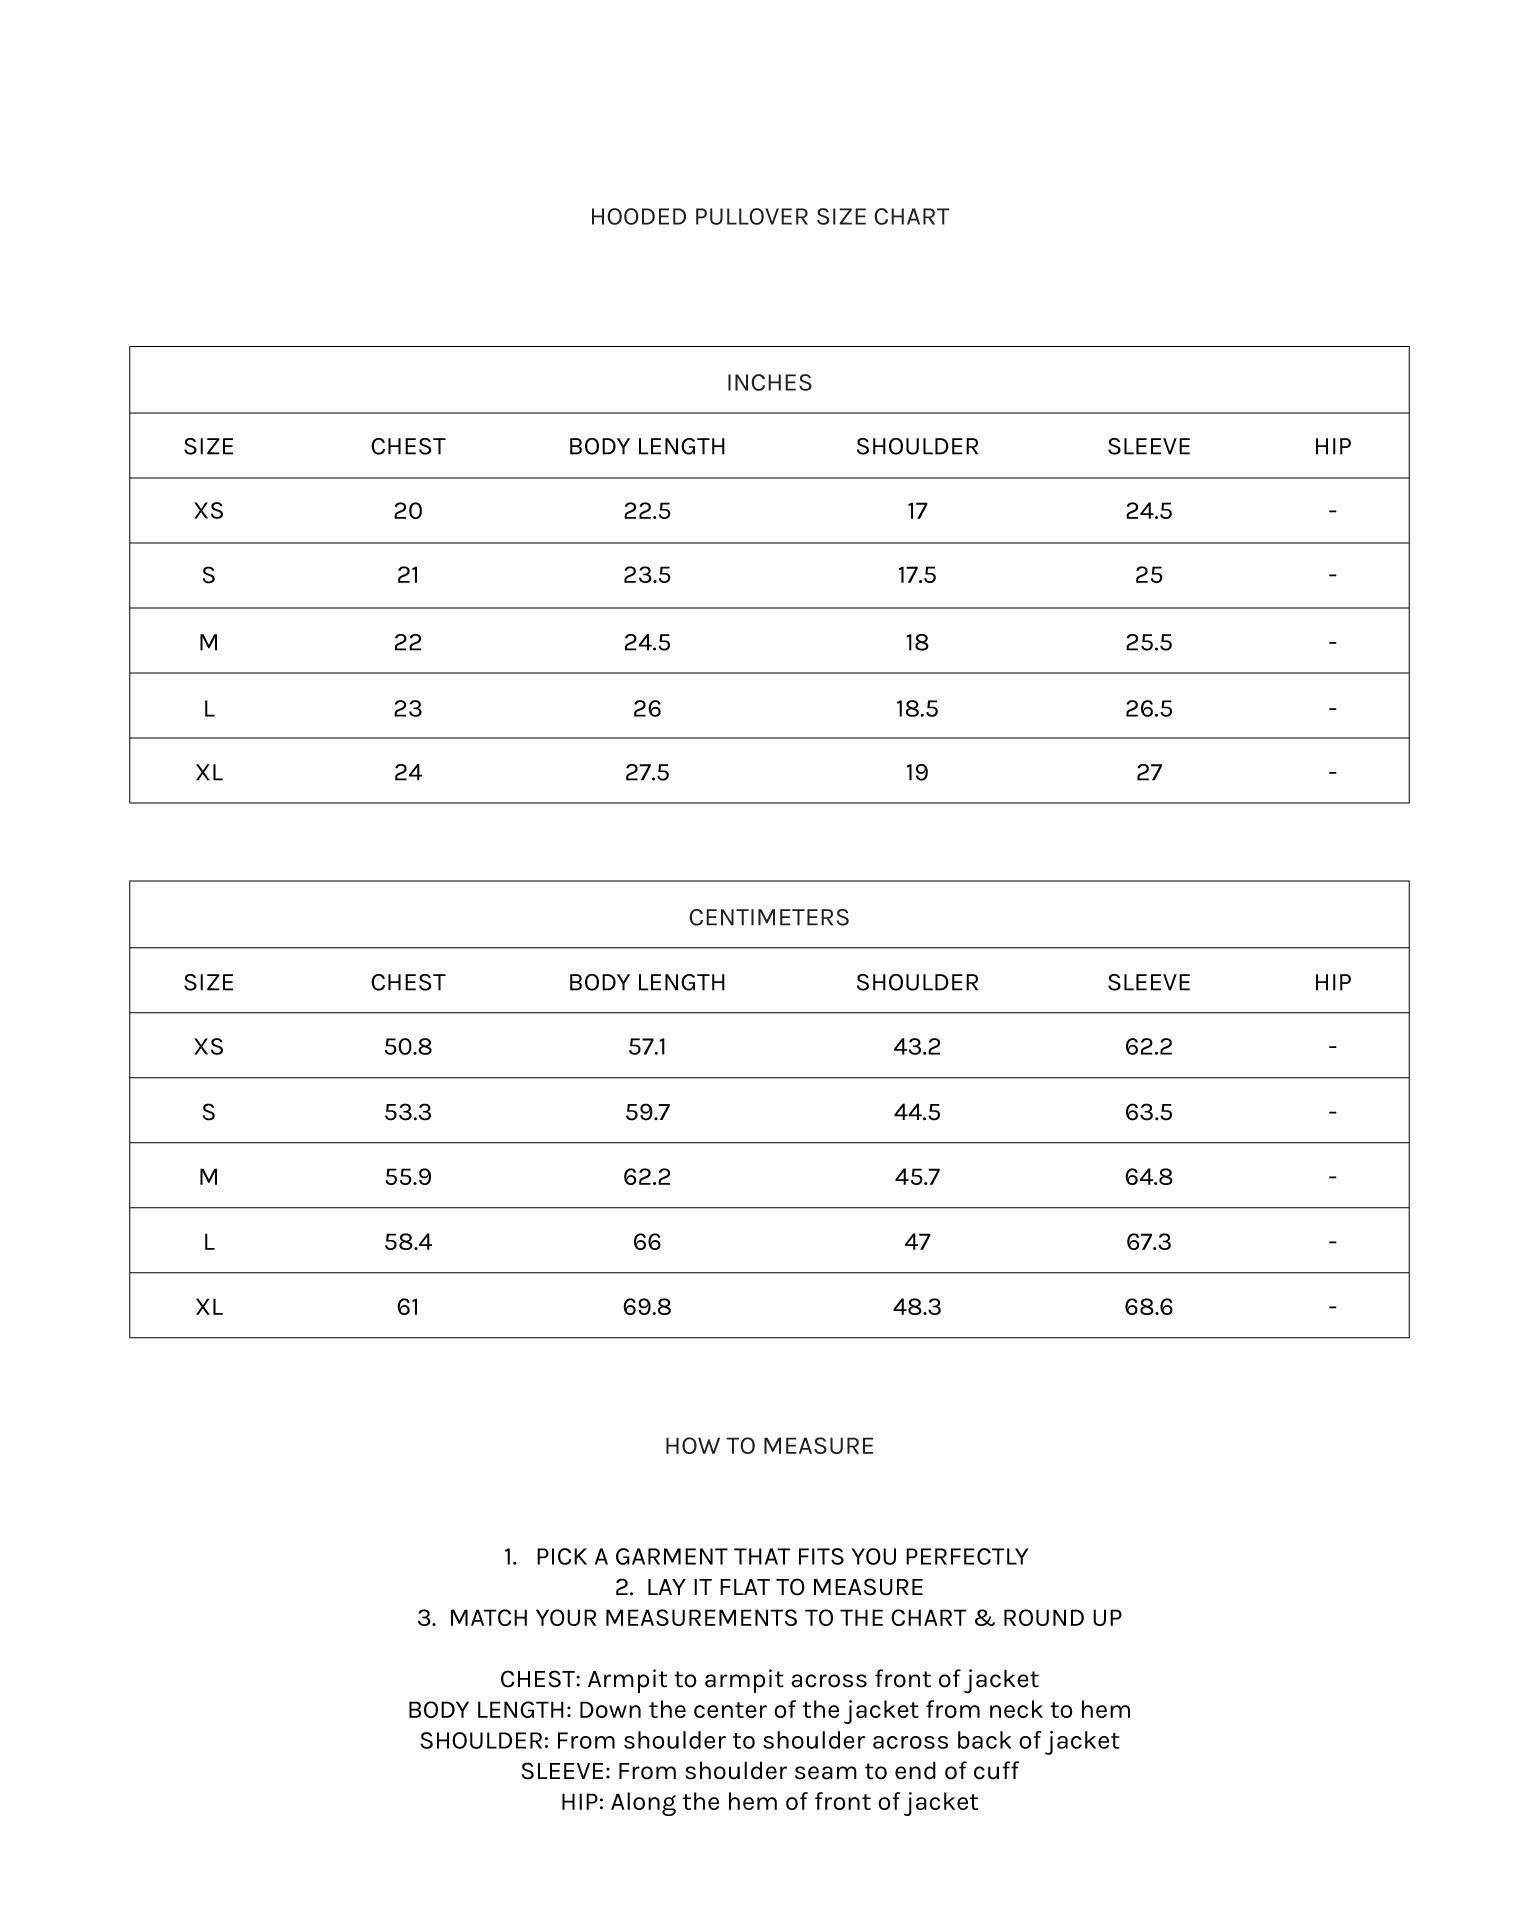 Hooded Pullover Size Chart